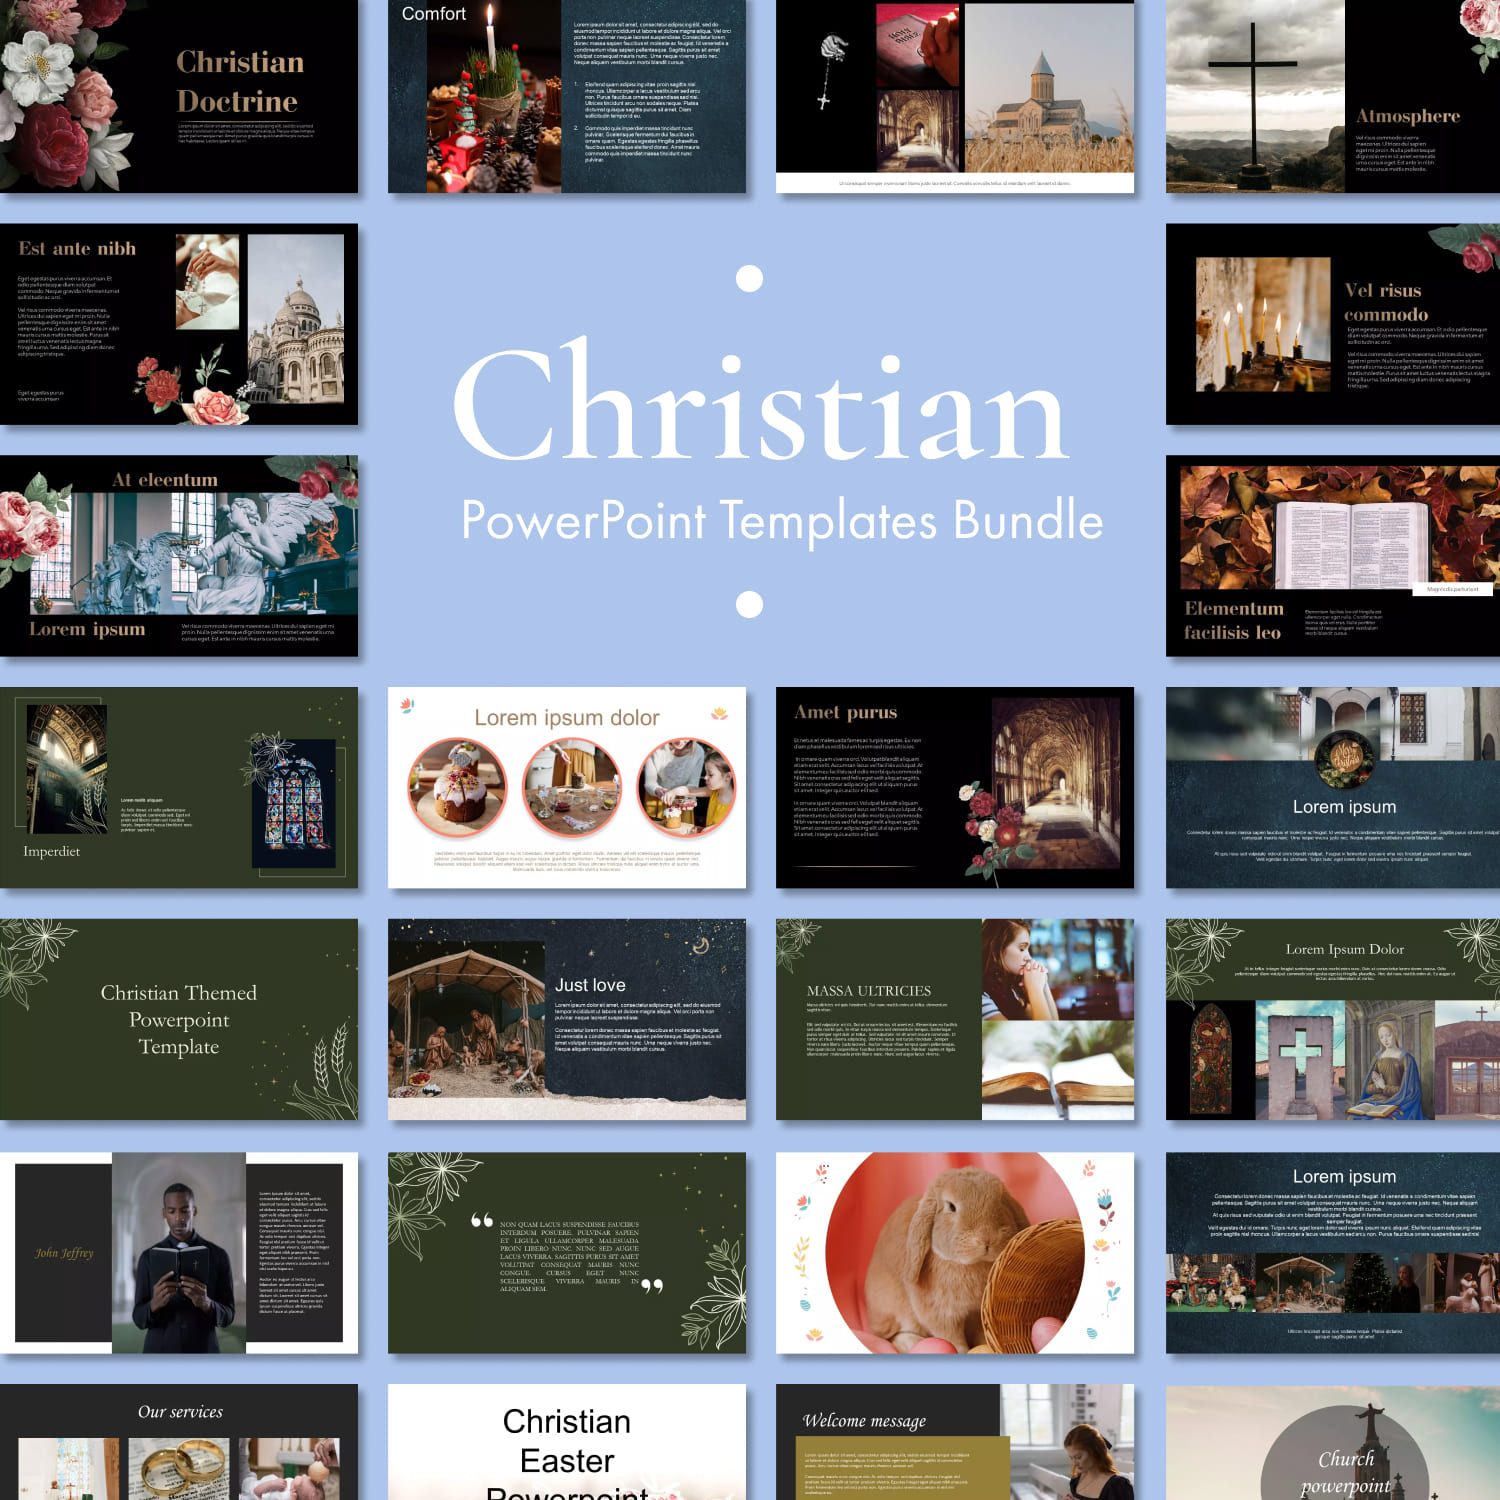 Images with christian powerpoint templates bundle.